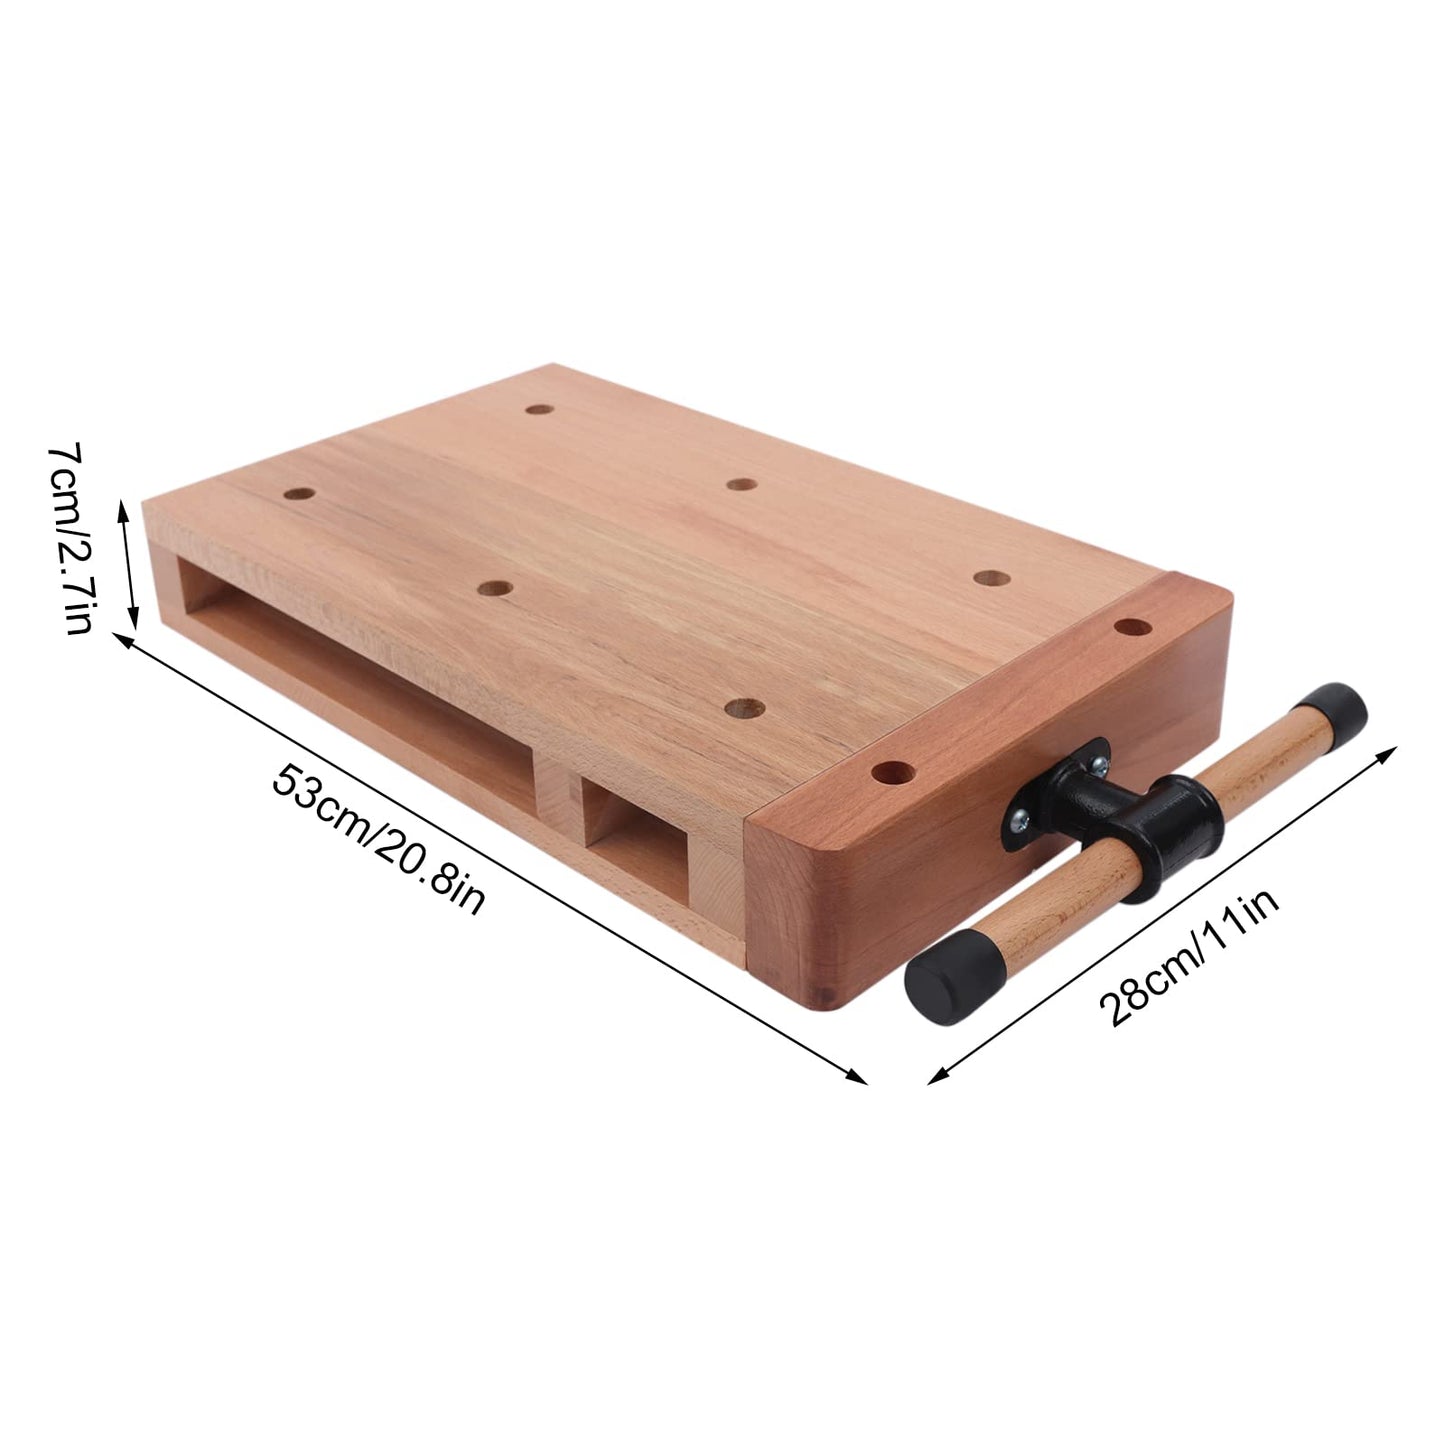 Woodworking Bench Vise,wood vise workbench for homes, woodworking studios, and teaching equipment for fixing and processing wood.